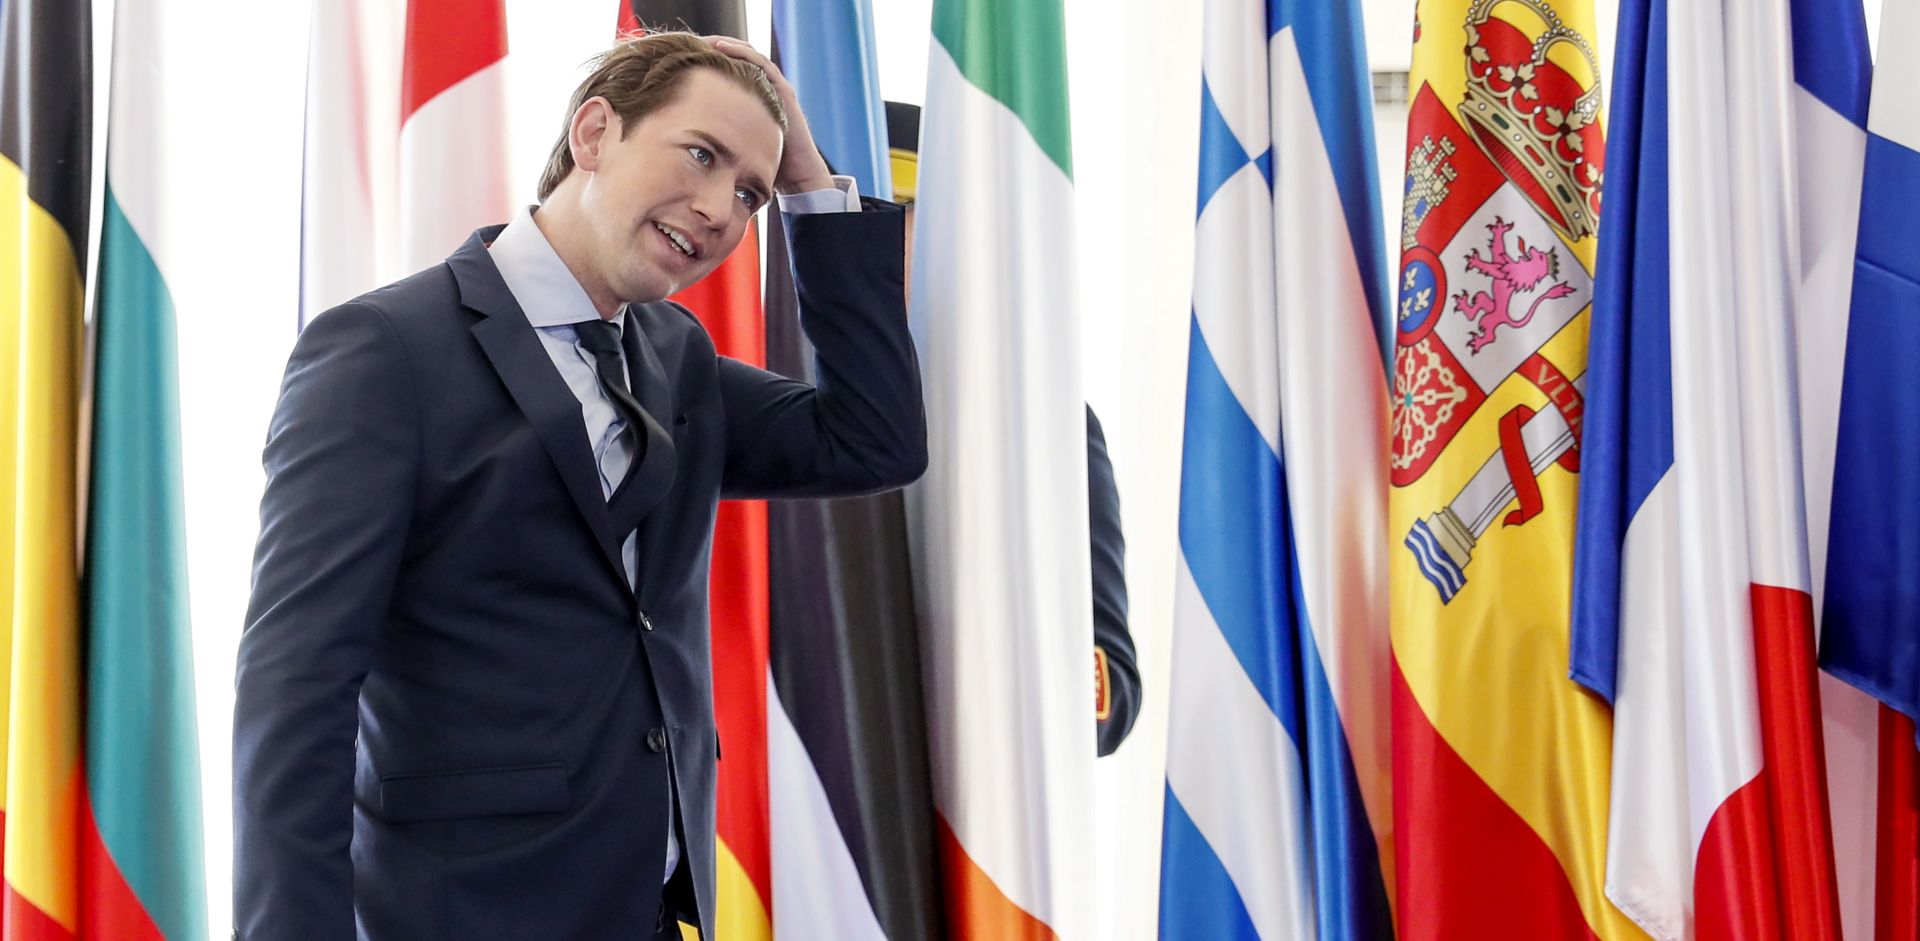 epa07557485 Austrian Chancellor Sebastian Kurz (C) arrives at an Informal Summit of Heads of State or Government of the European Union, held at the City Hall of Sibiu city, 275 Km north from Bucharest, Romania, 09 May 2019.  EPA/ROBERT GHEMENT